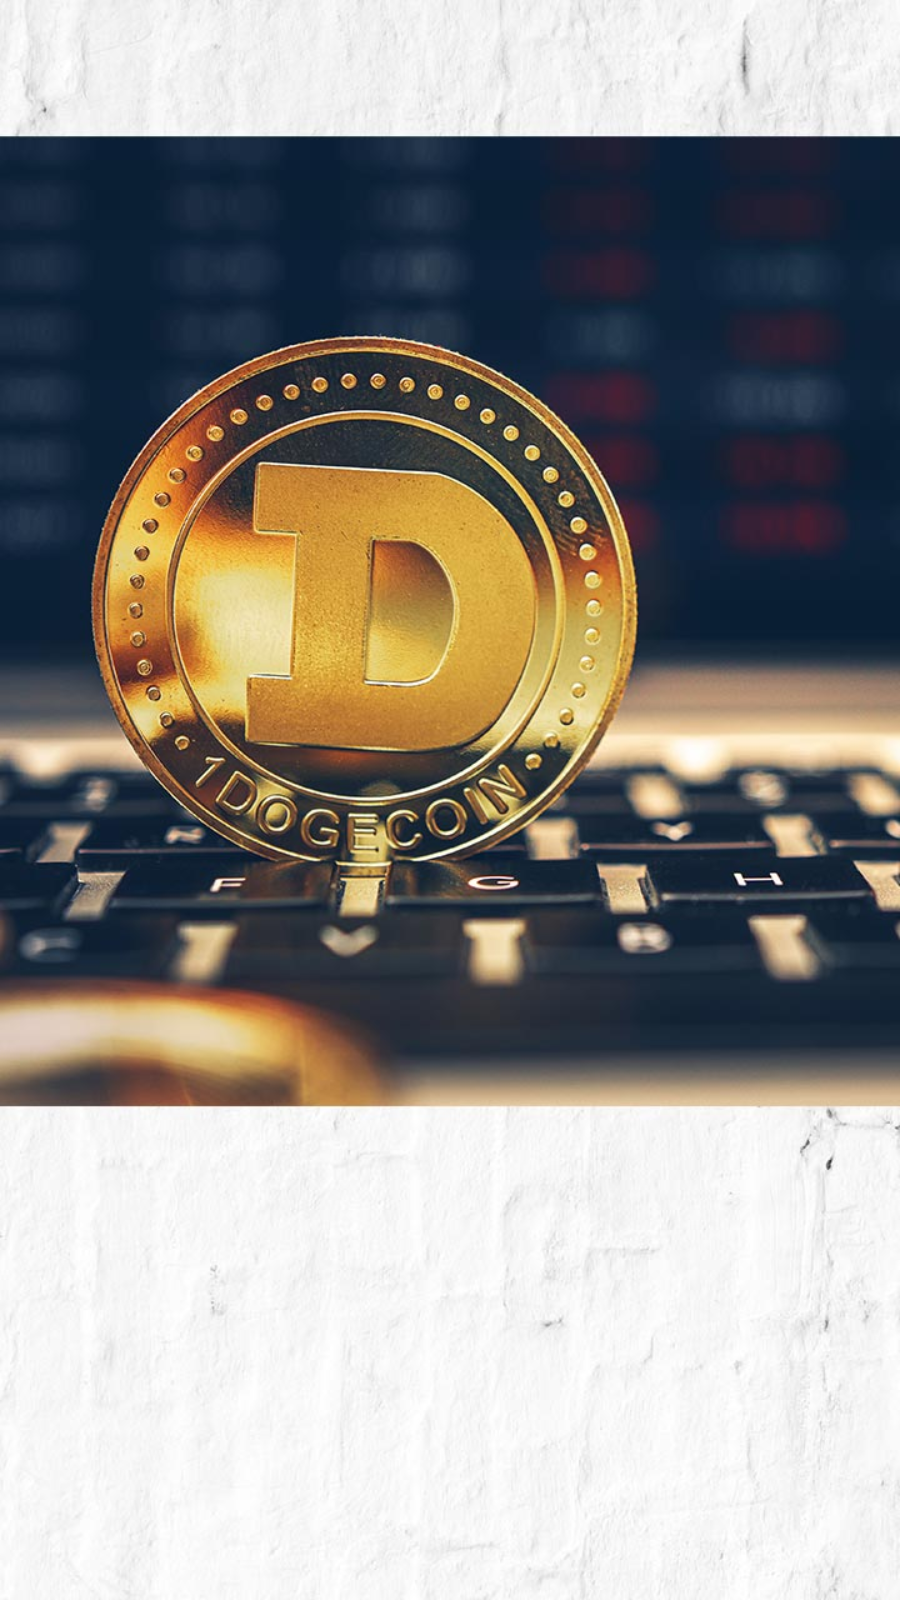 dogecoin digital currency